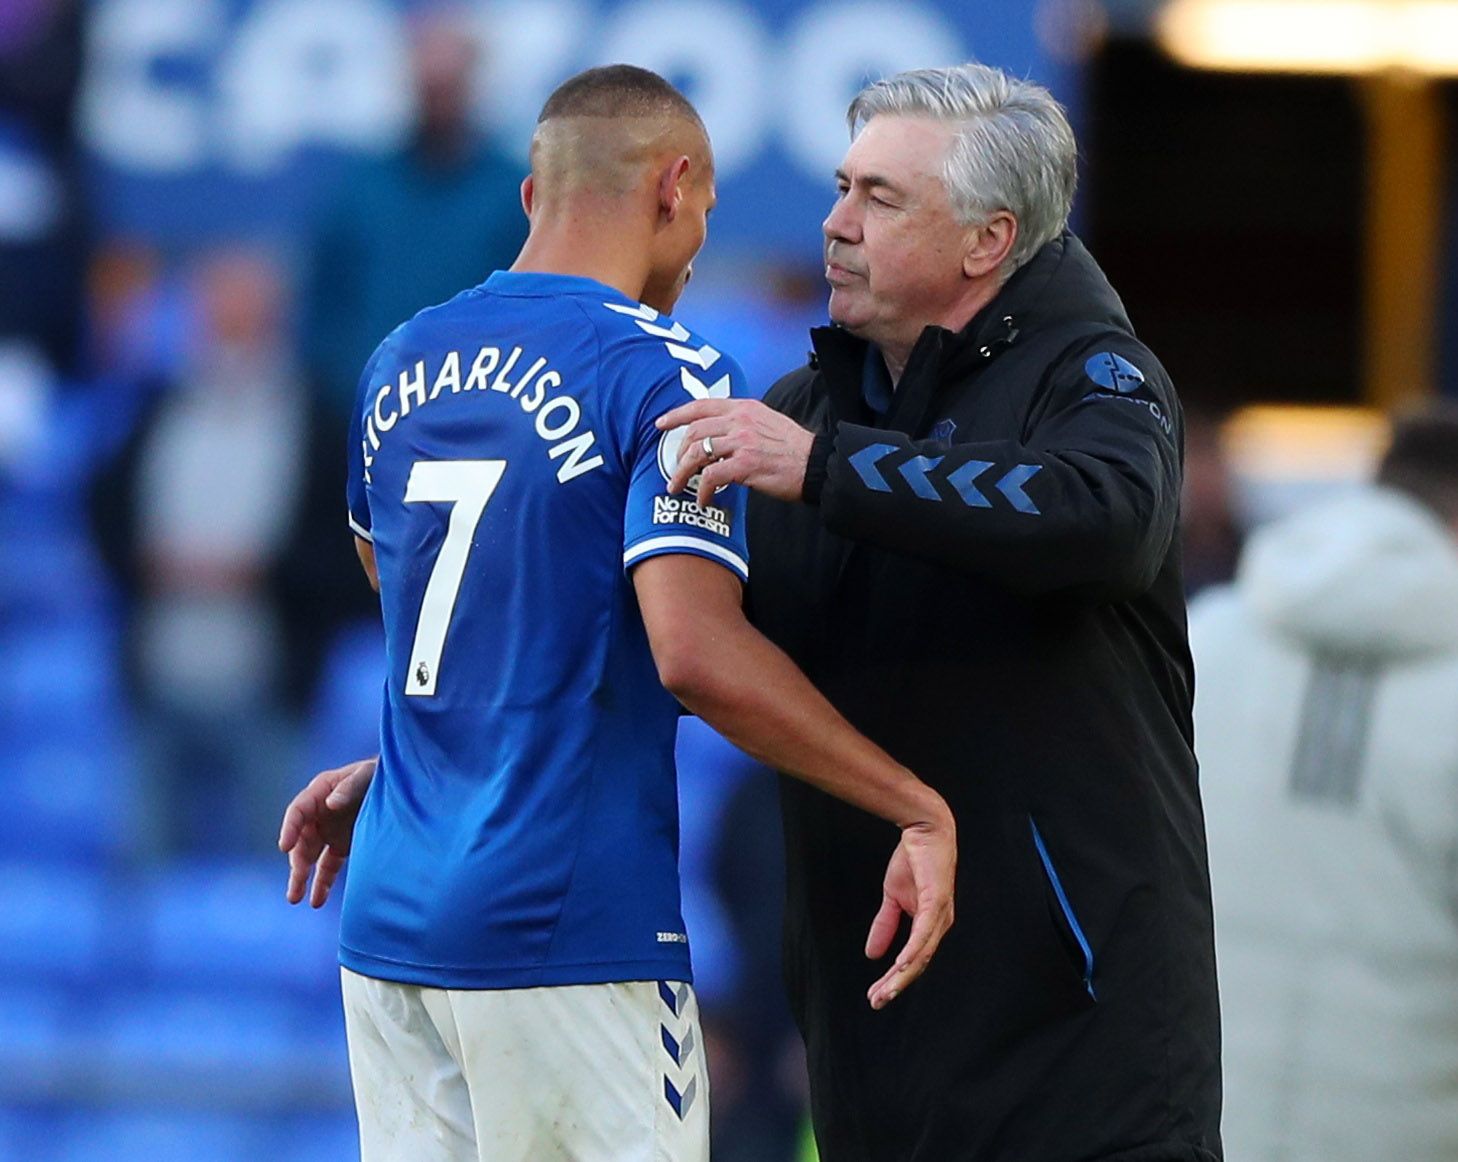 Soccer Football - Premier League - Everton v Wolverhampton Wanderers - Goodison Park, Liverpool, Britain - May 19, 2021 Everton manager Carlo Ancelotti with Richarlison after the match Pool via REUTERS/Peter Byrne EDITORIAL USE ONLY. No use with unauthorized audio, video, data, fixture lists, club/league logos or 'live' services. Online in-match use limited to 75 images, no video emulation. No use in betting, games or single club /league/player publications.  Please contact your account represen